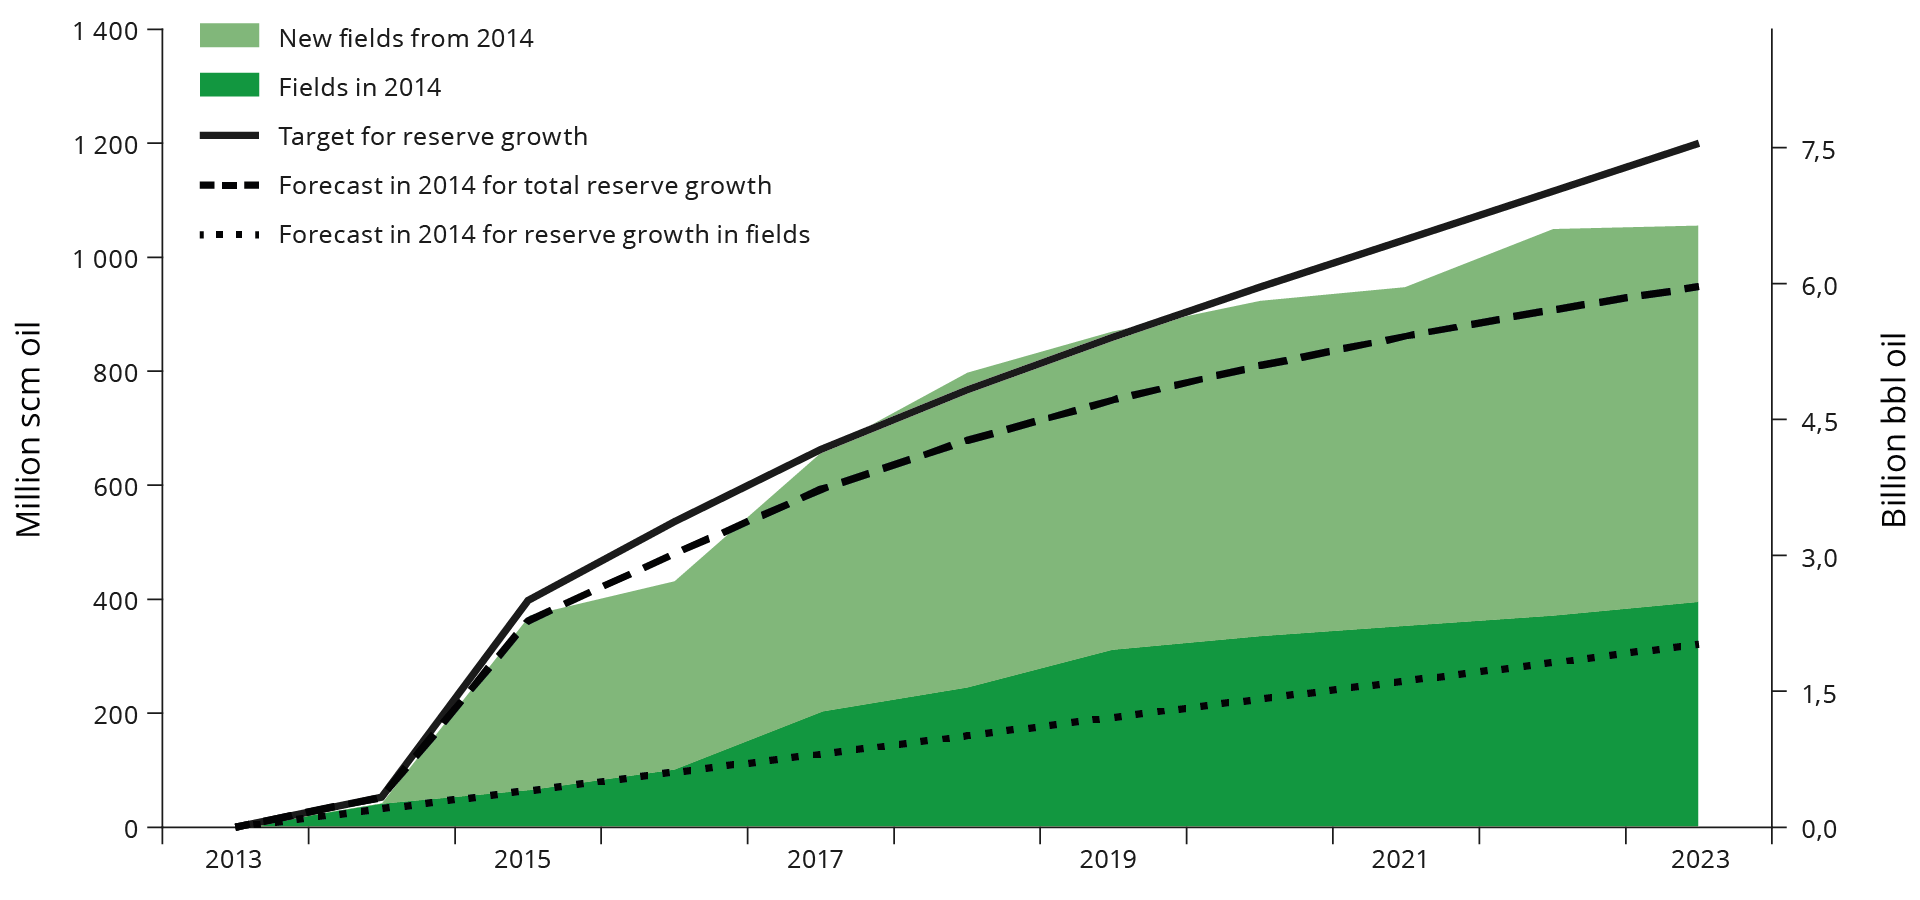 figure2-3-target-for-reserve-growth-2014.png